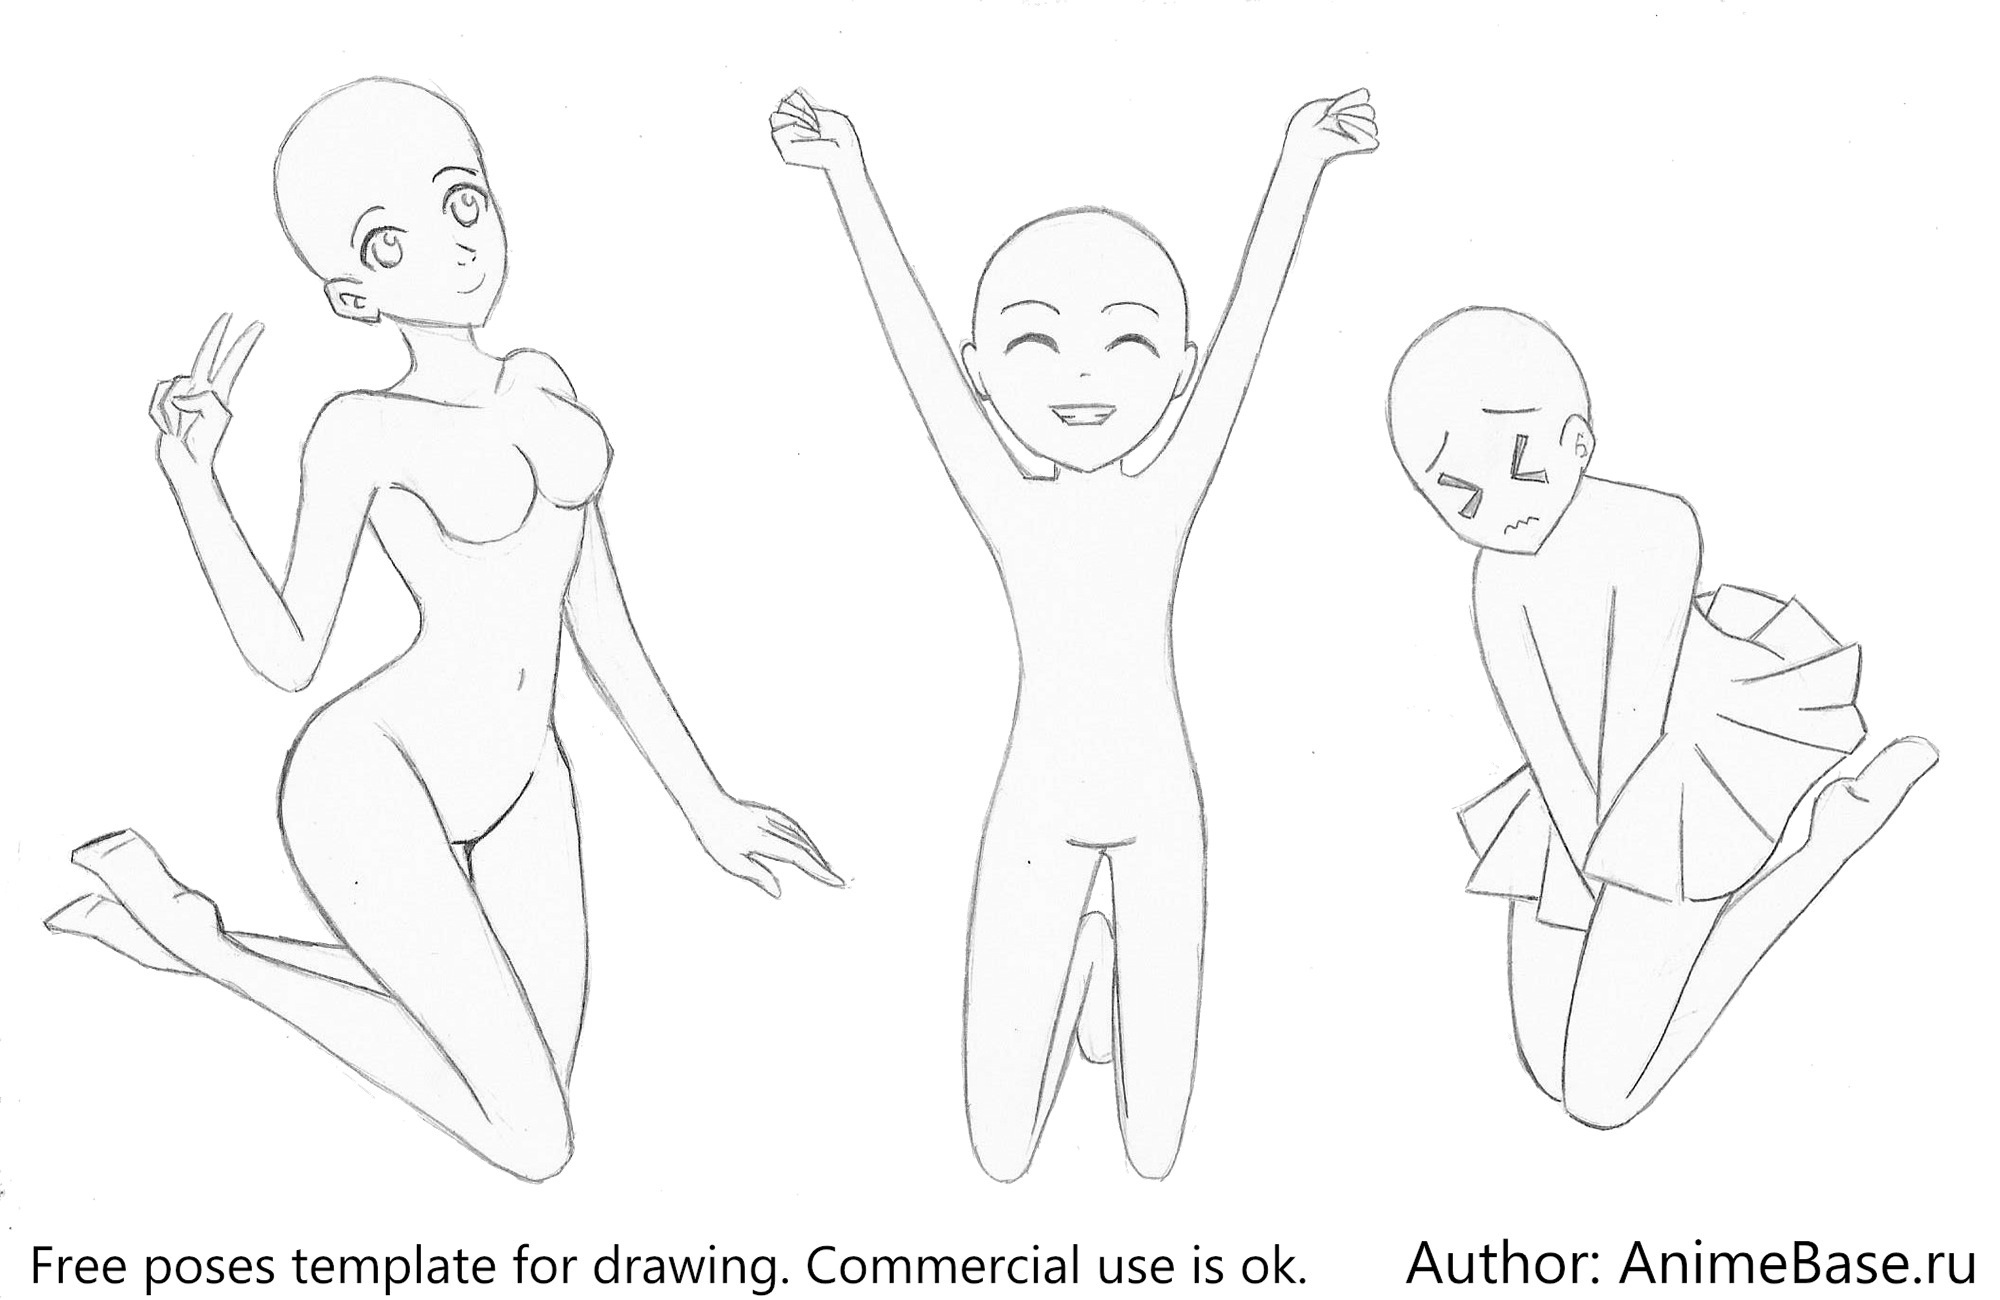 Free anime bases (poses for drawing) for commerce and ych.